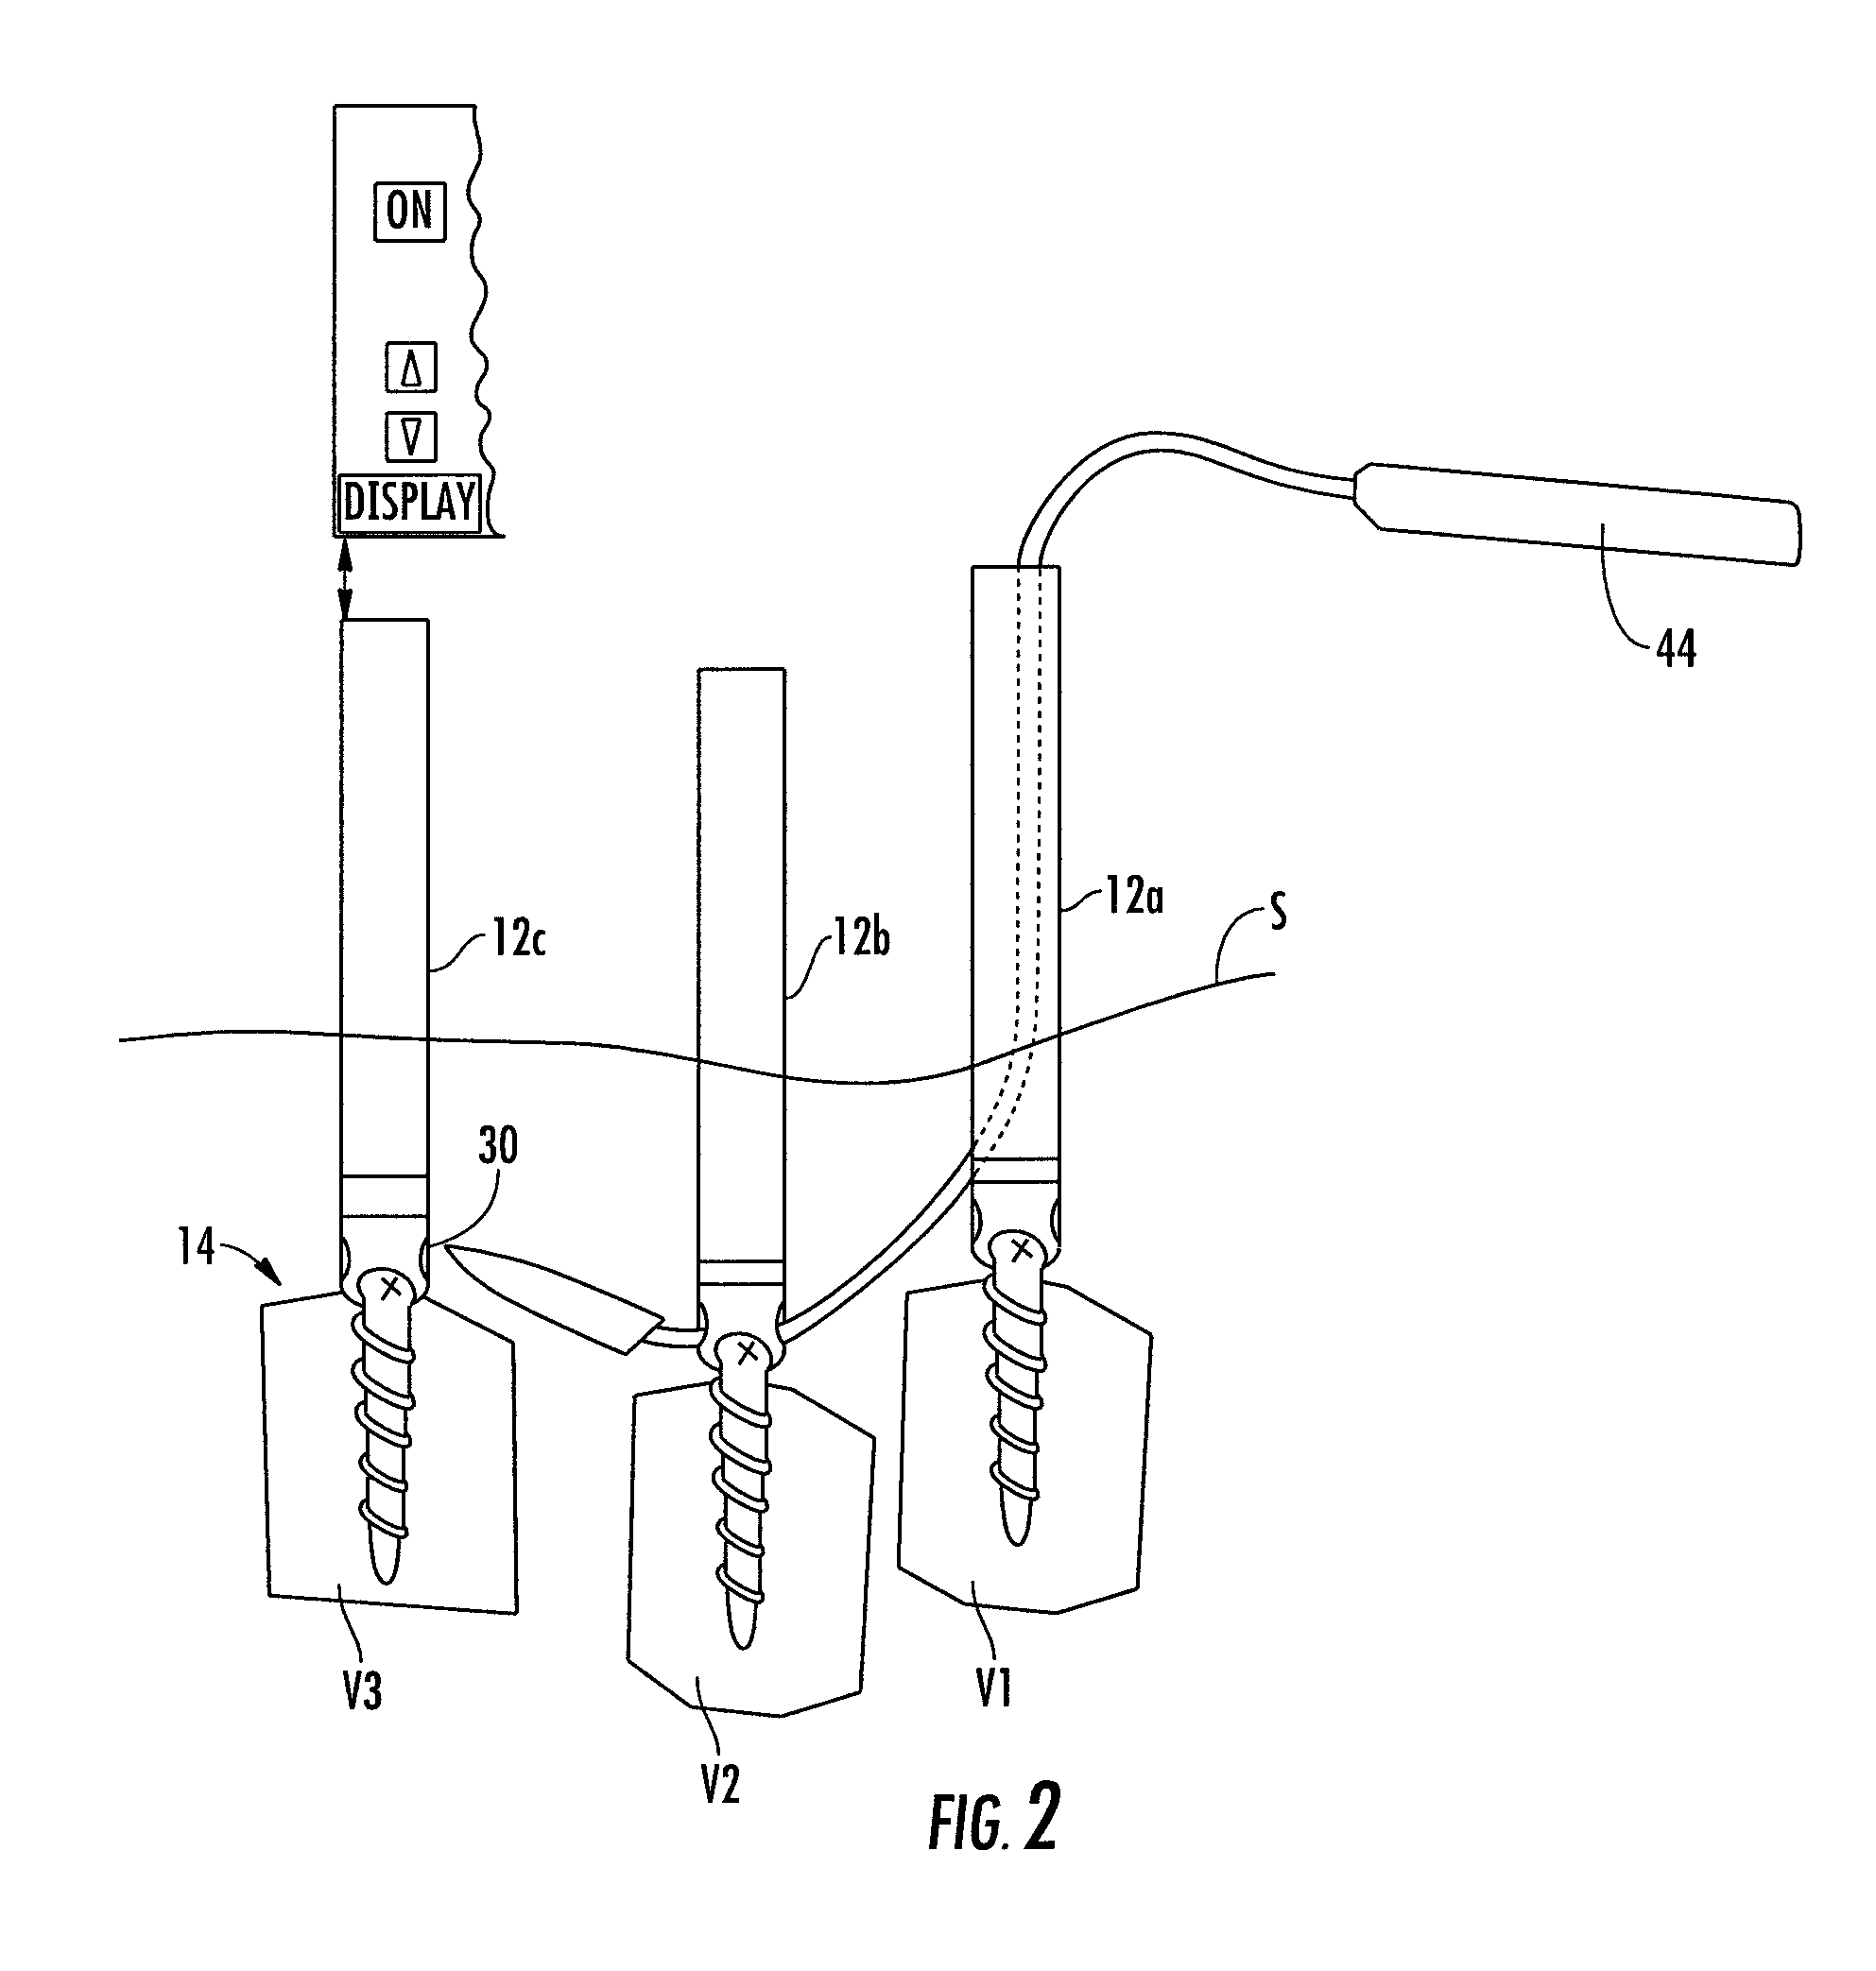 Method and apparatus for facilitating navigation of an implant